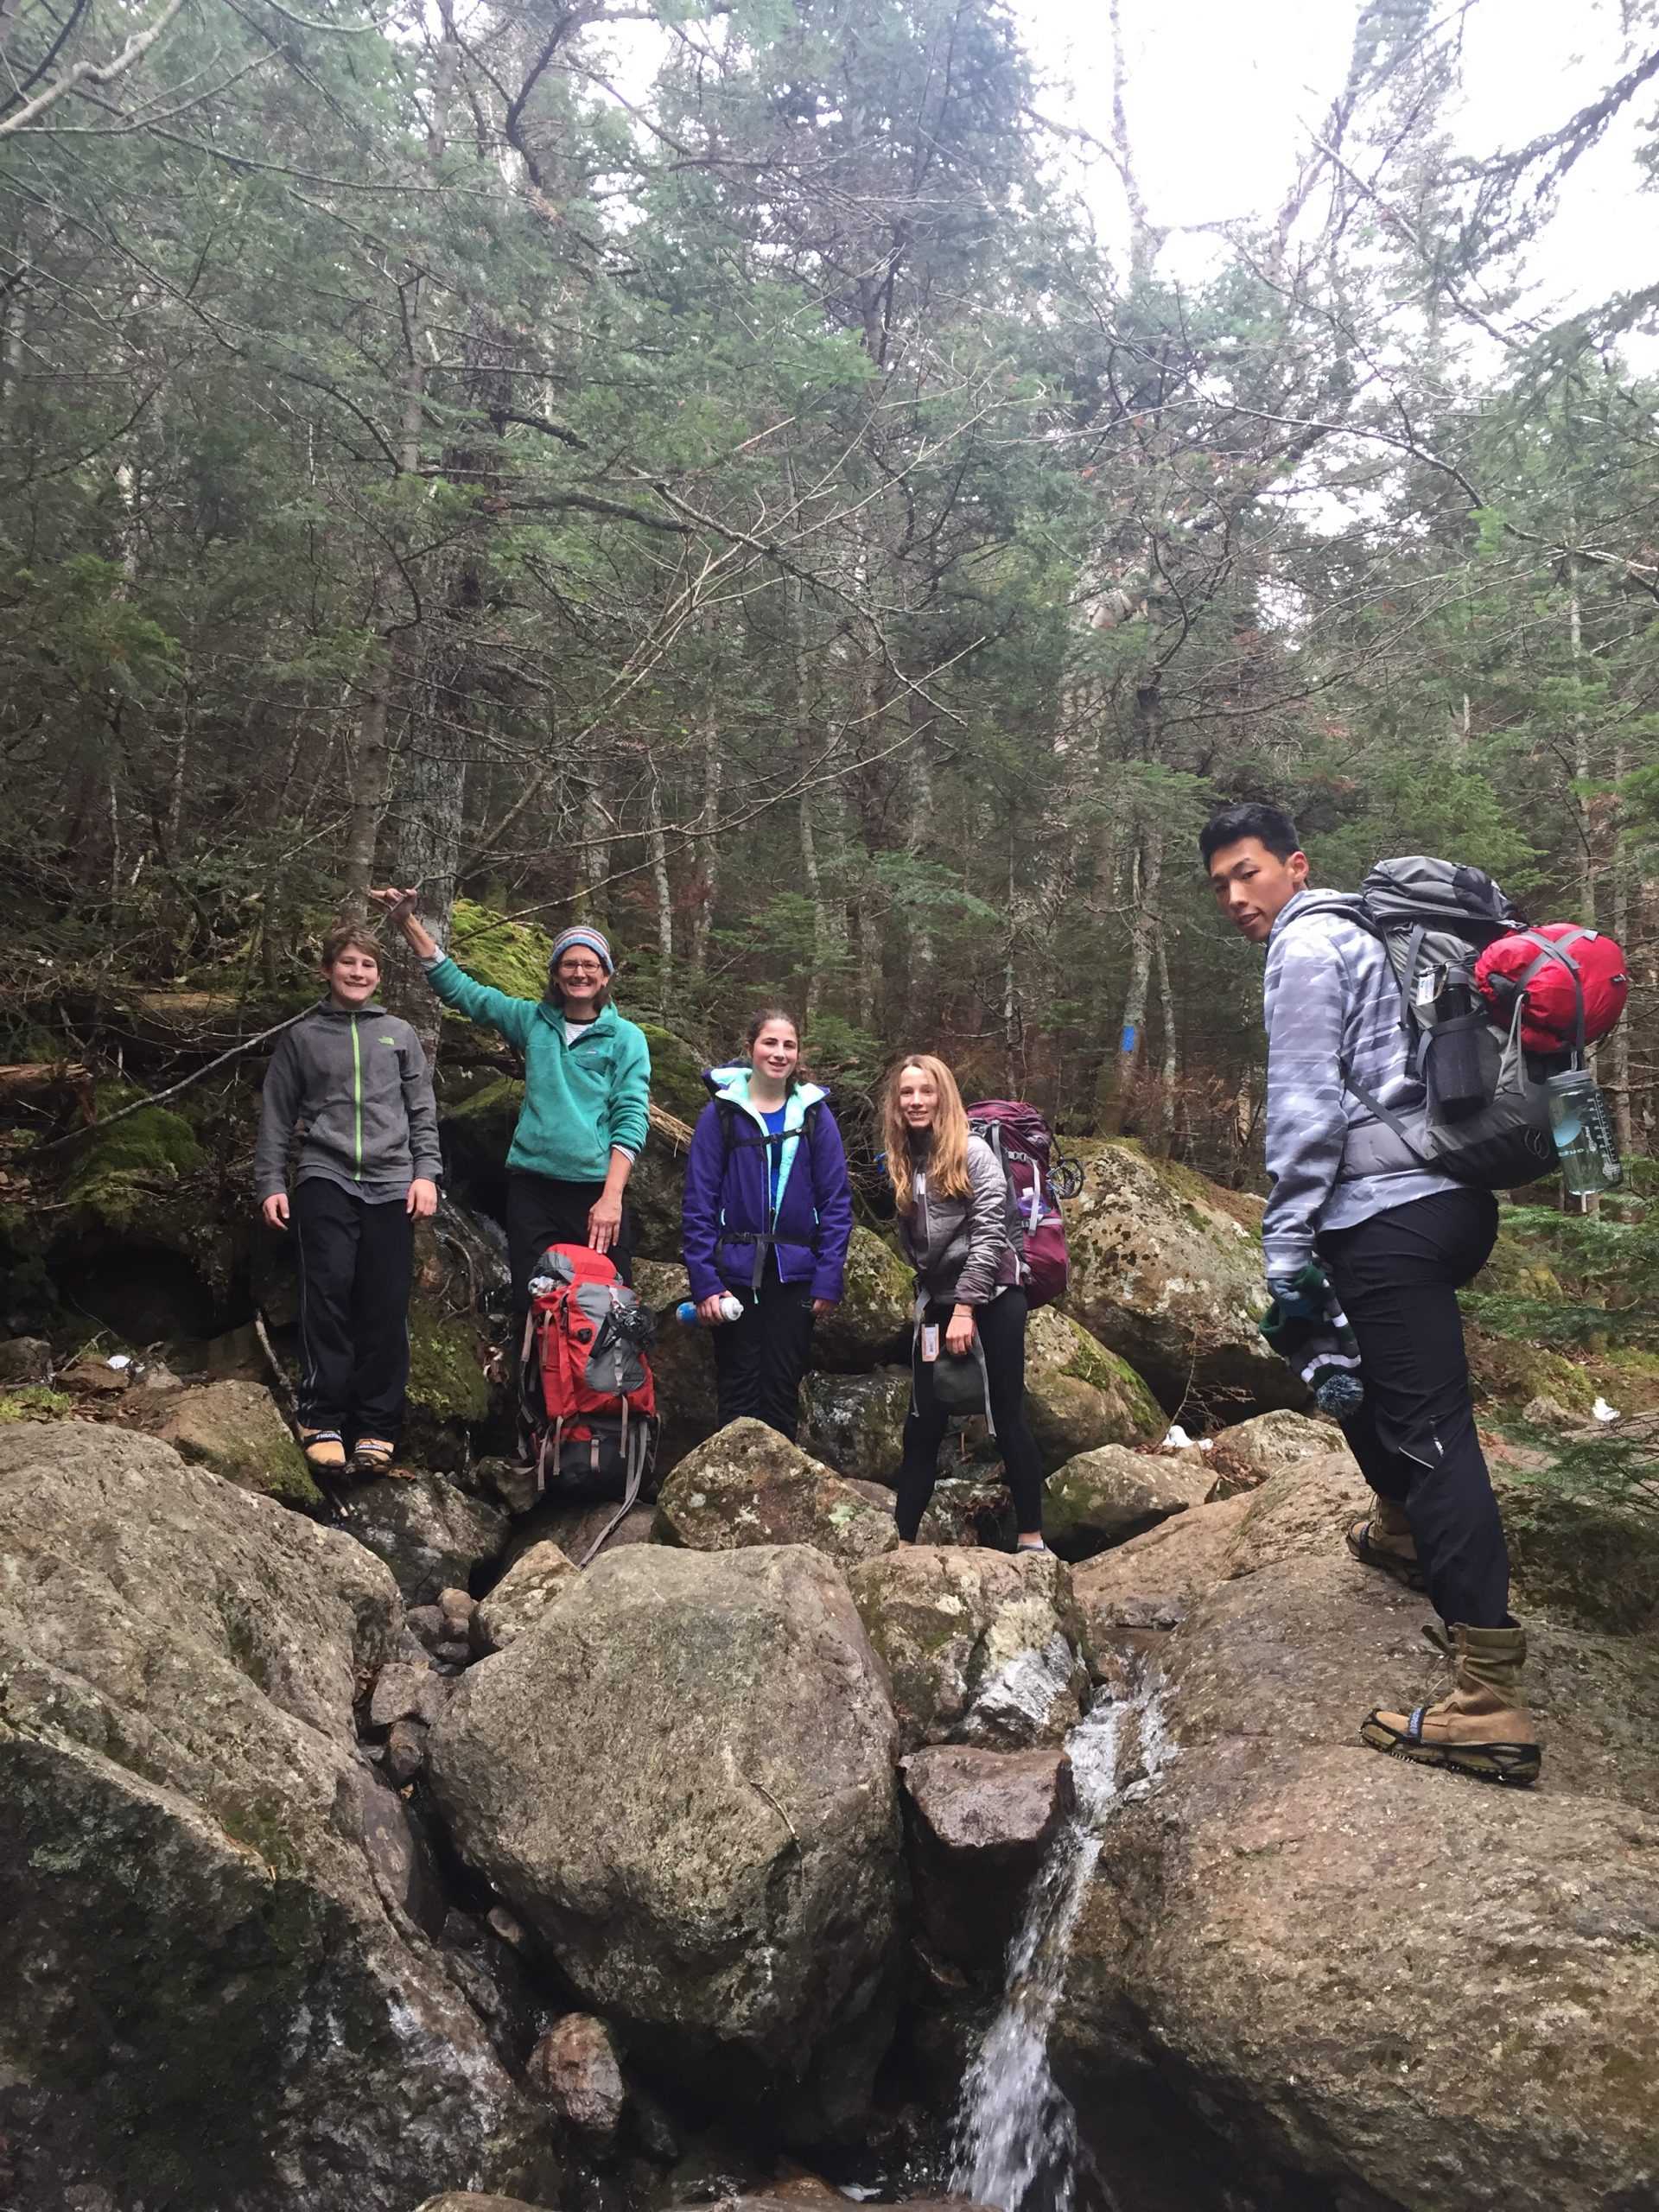 Students+enjoyed+hiking+in+the+White+Mountains.+